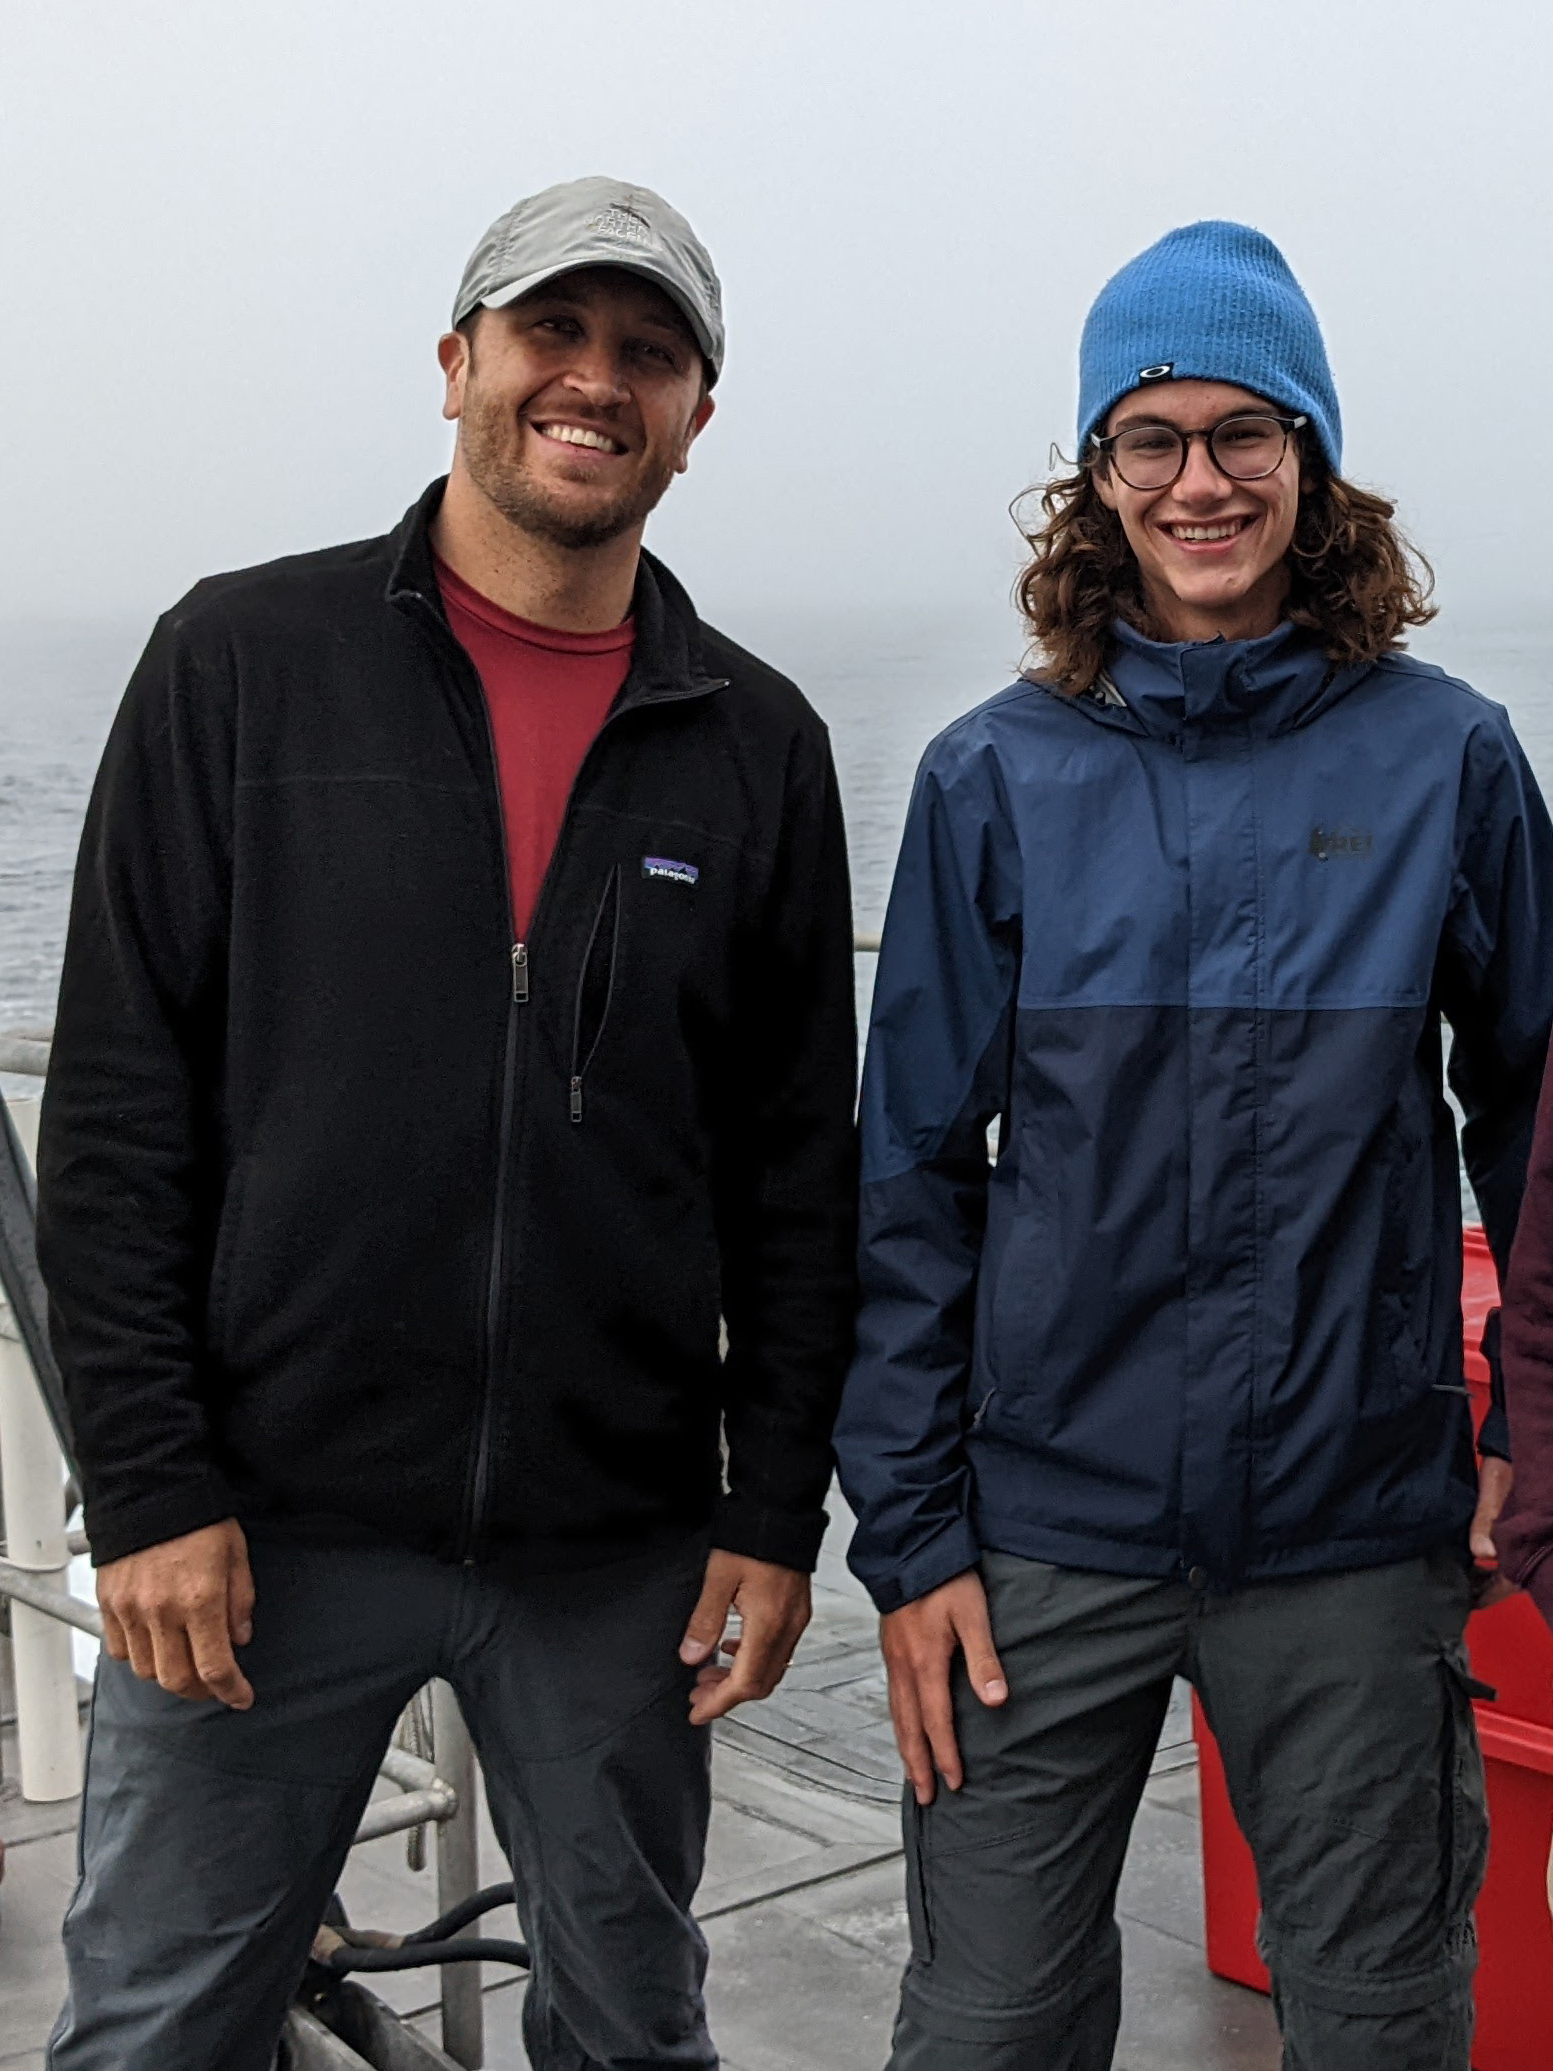 A professor and student smile for a photo together on a gray morning with the ocean behind them.